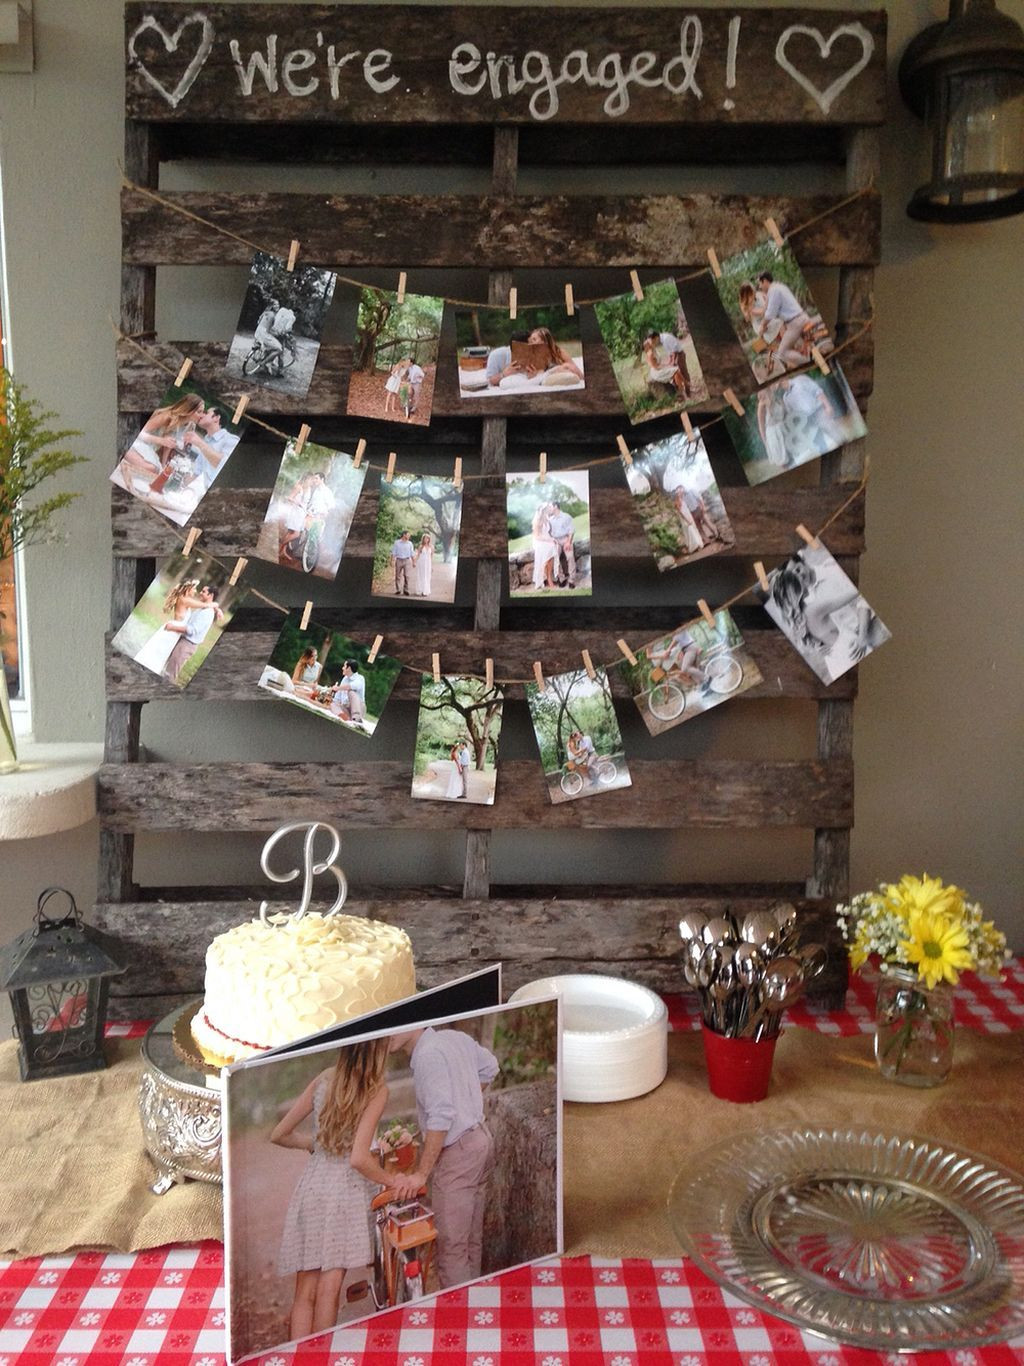 Backyard Bbq Engagement Party Ideas
 Tips for Looking Your Best on Your Wedding Day